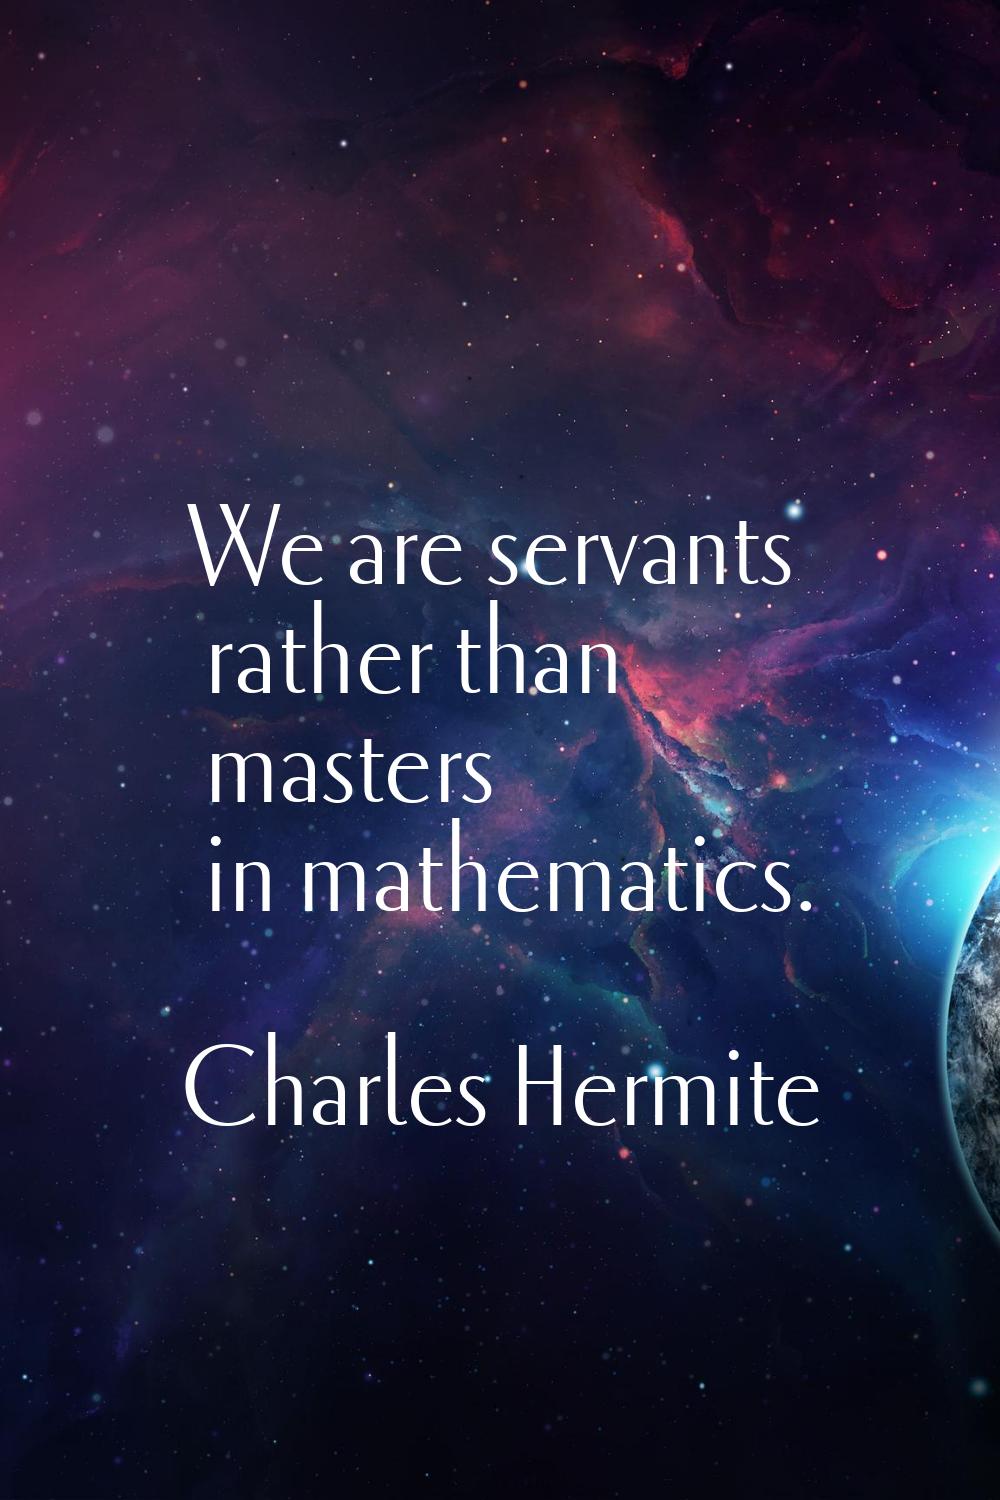 We are servants rather than masters in mathematics.